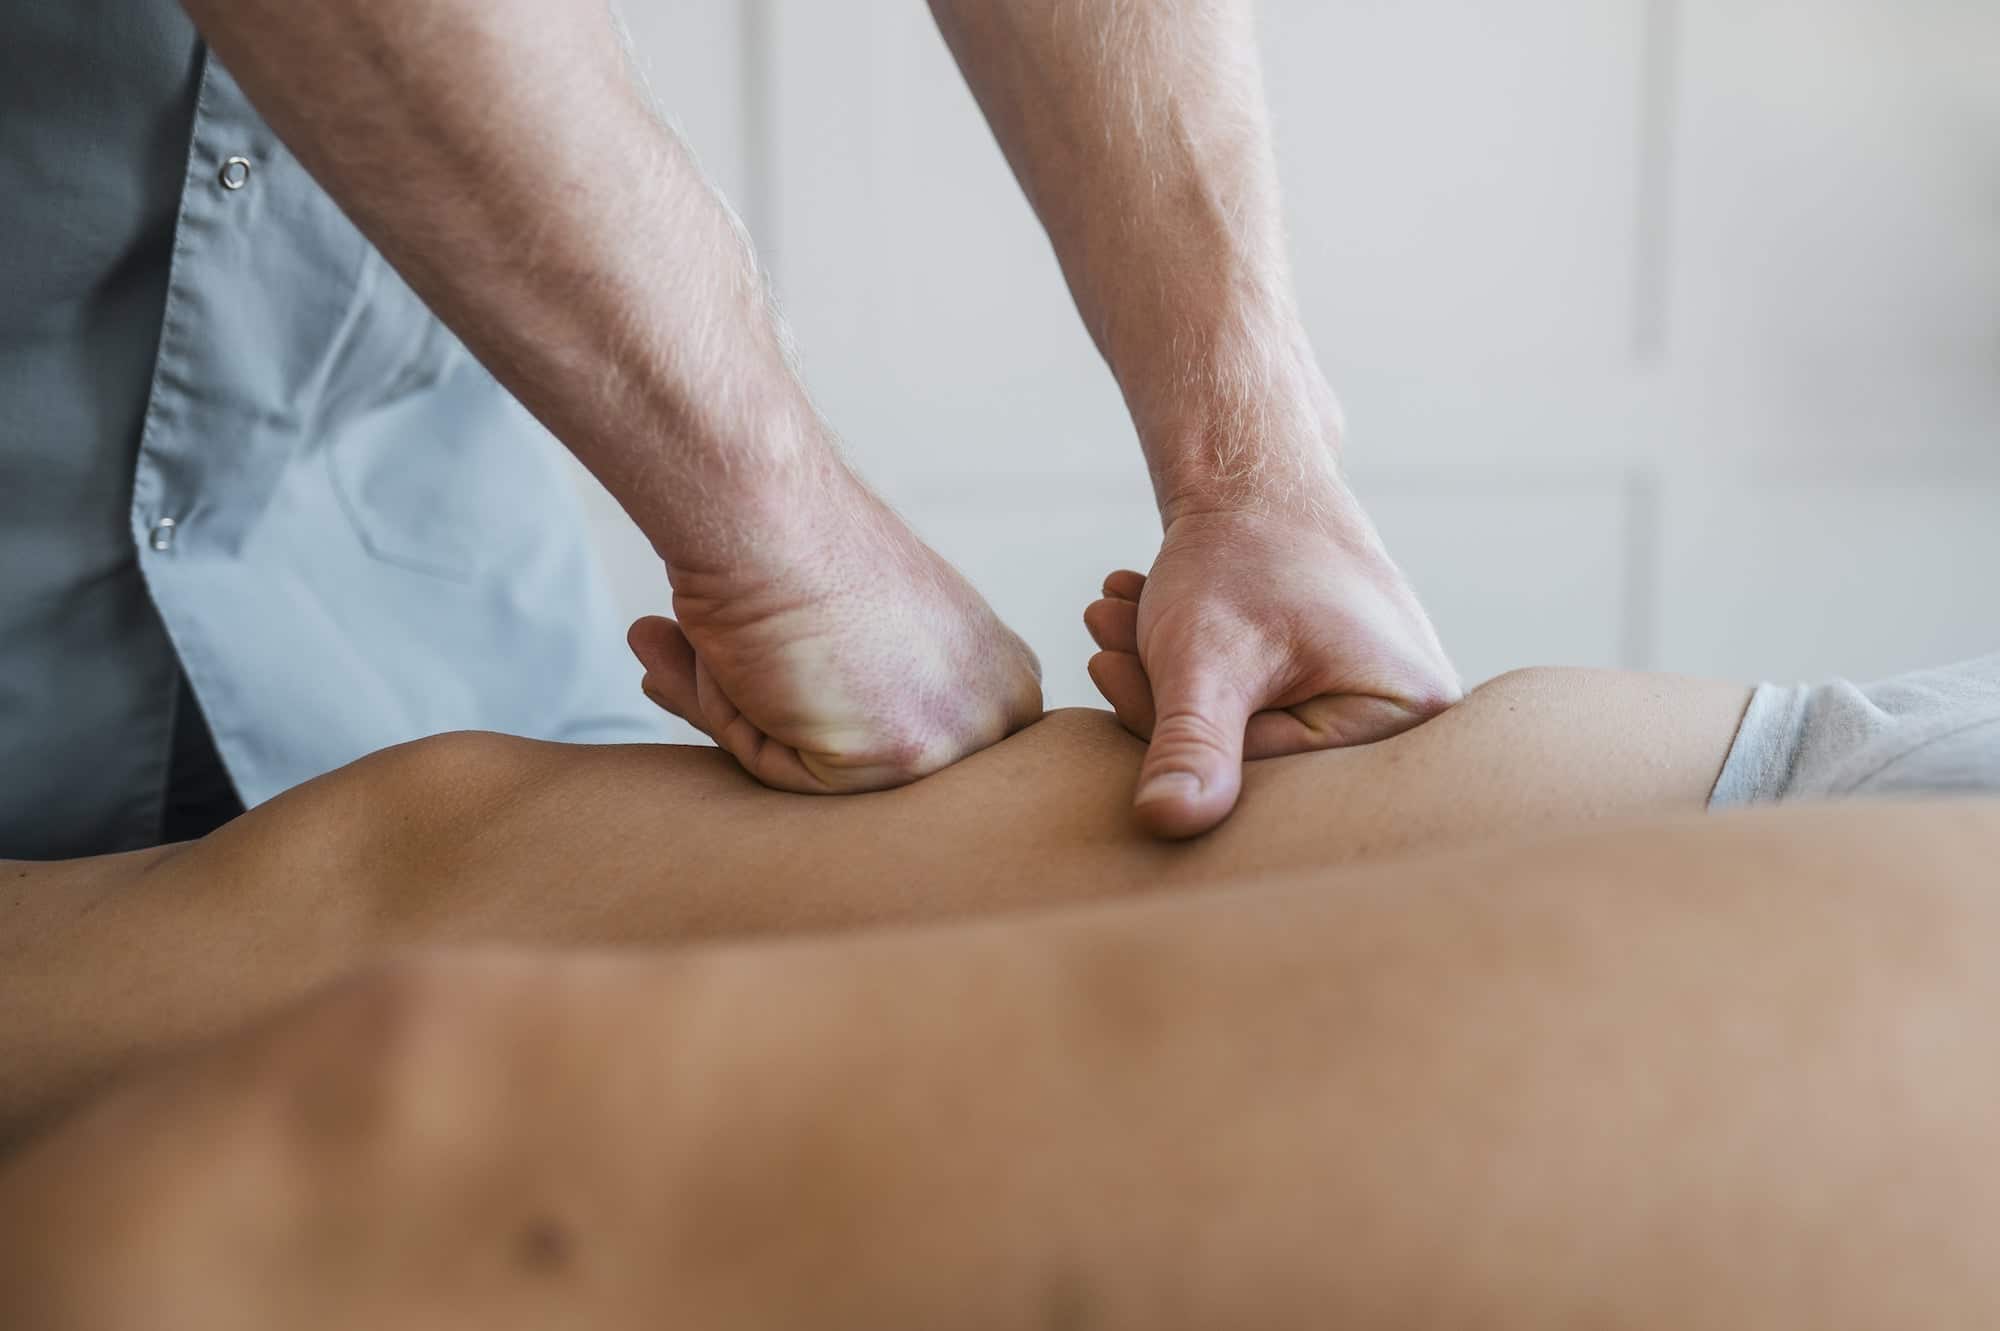 Looking for an RMT to perform massage therapy in victoria